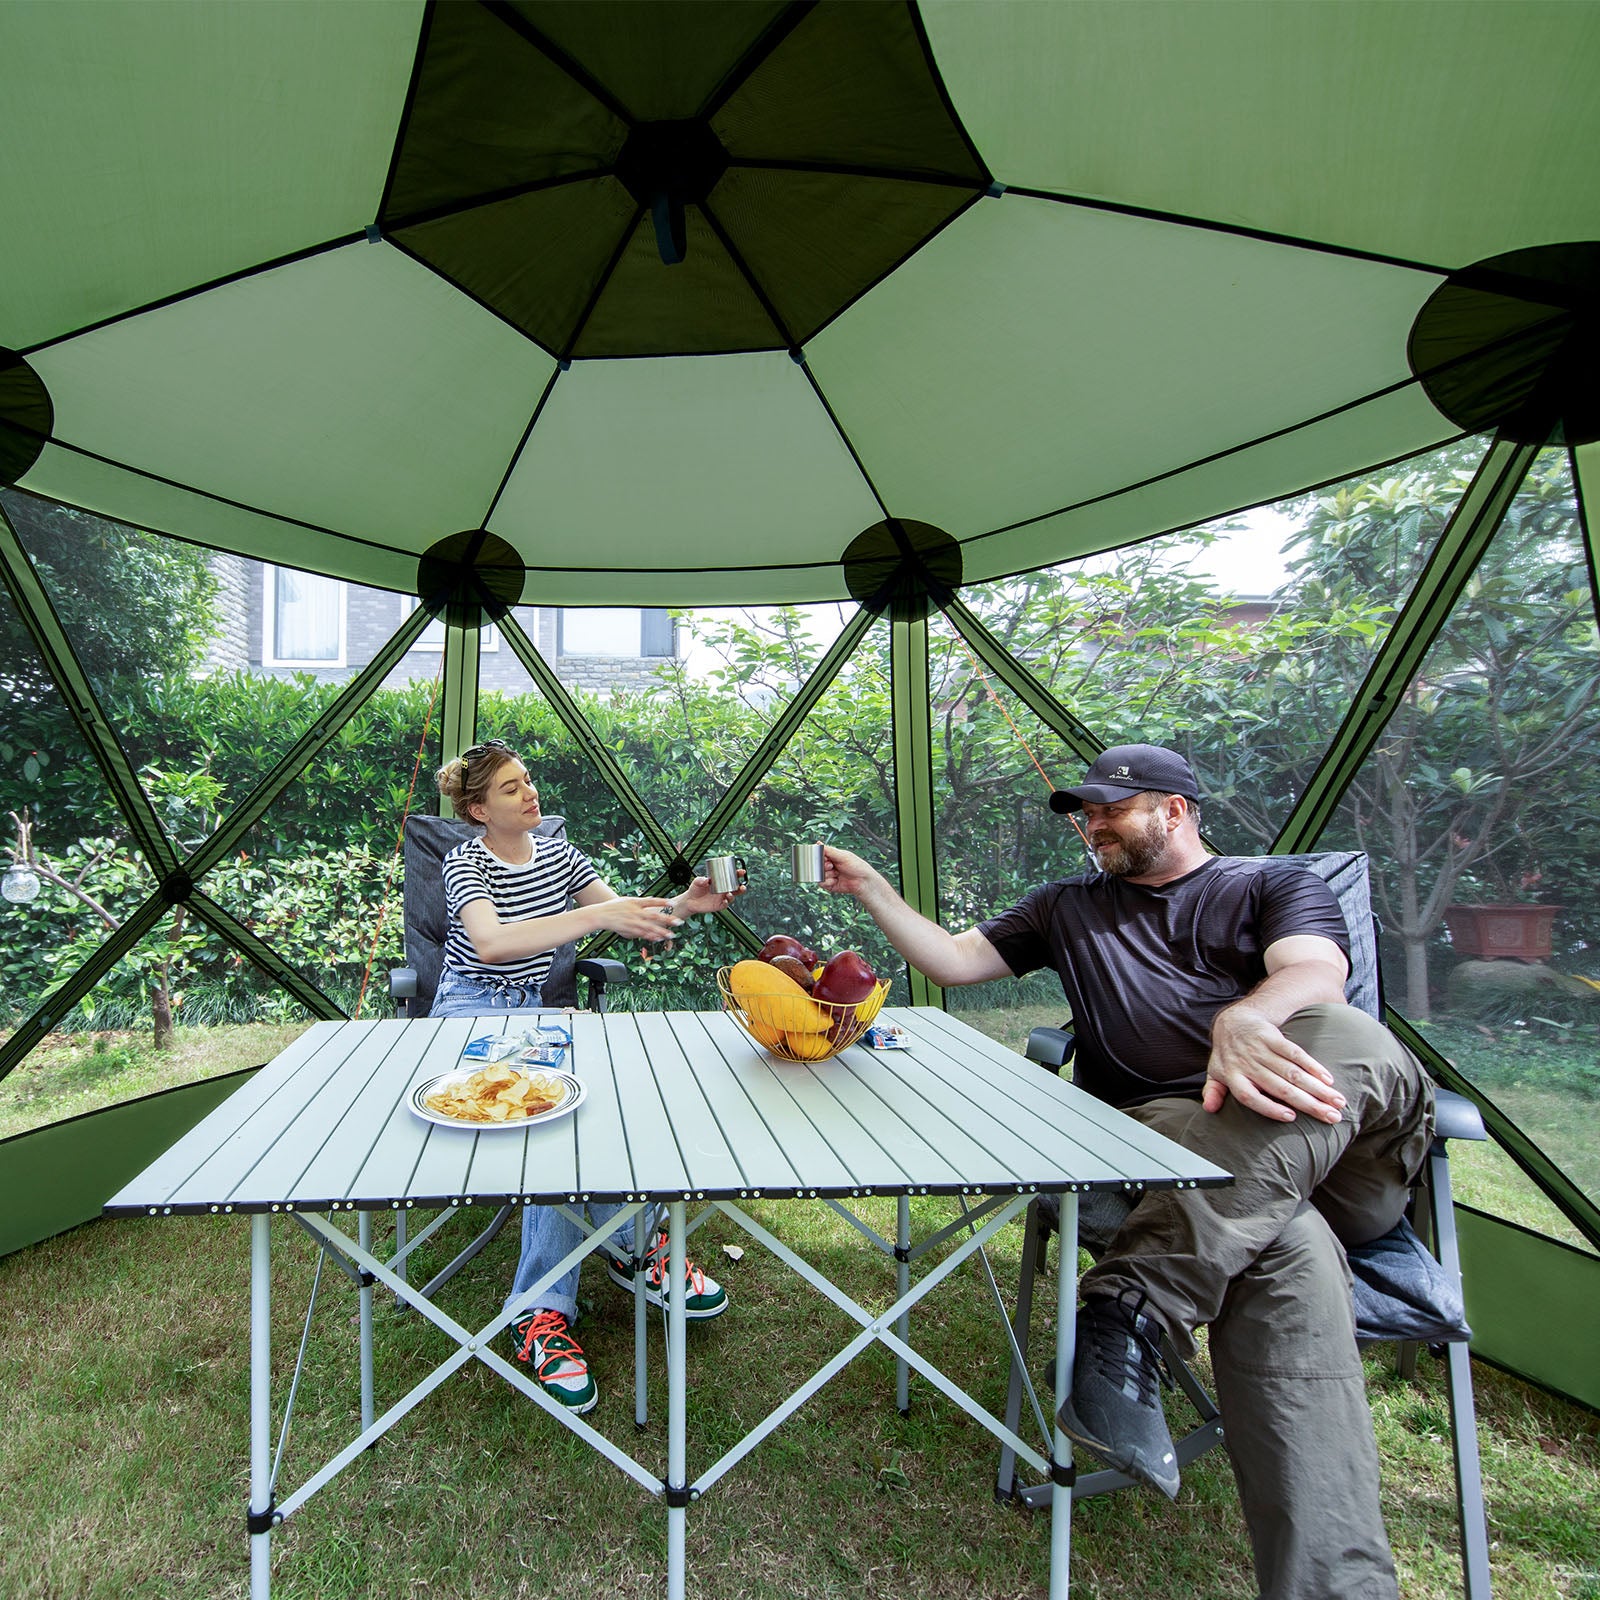 Ever Advanced 6 Person Pop up Screen House Tent